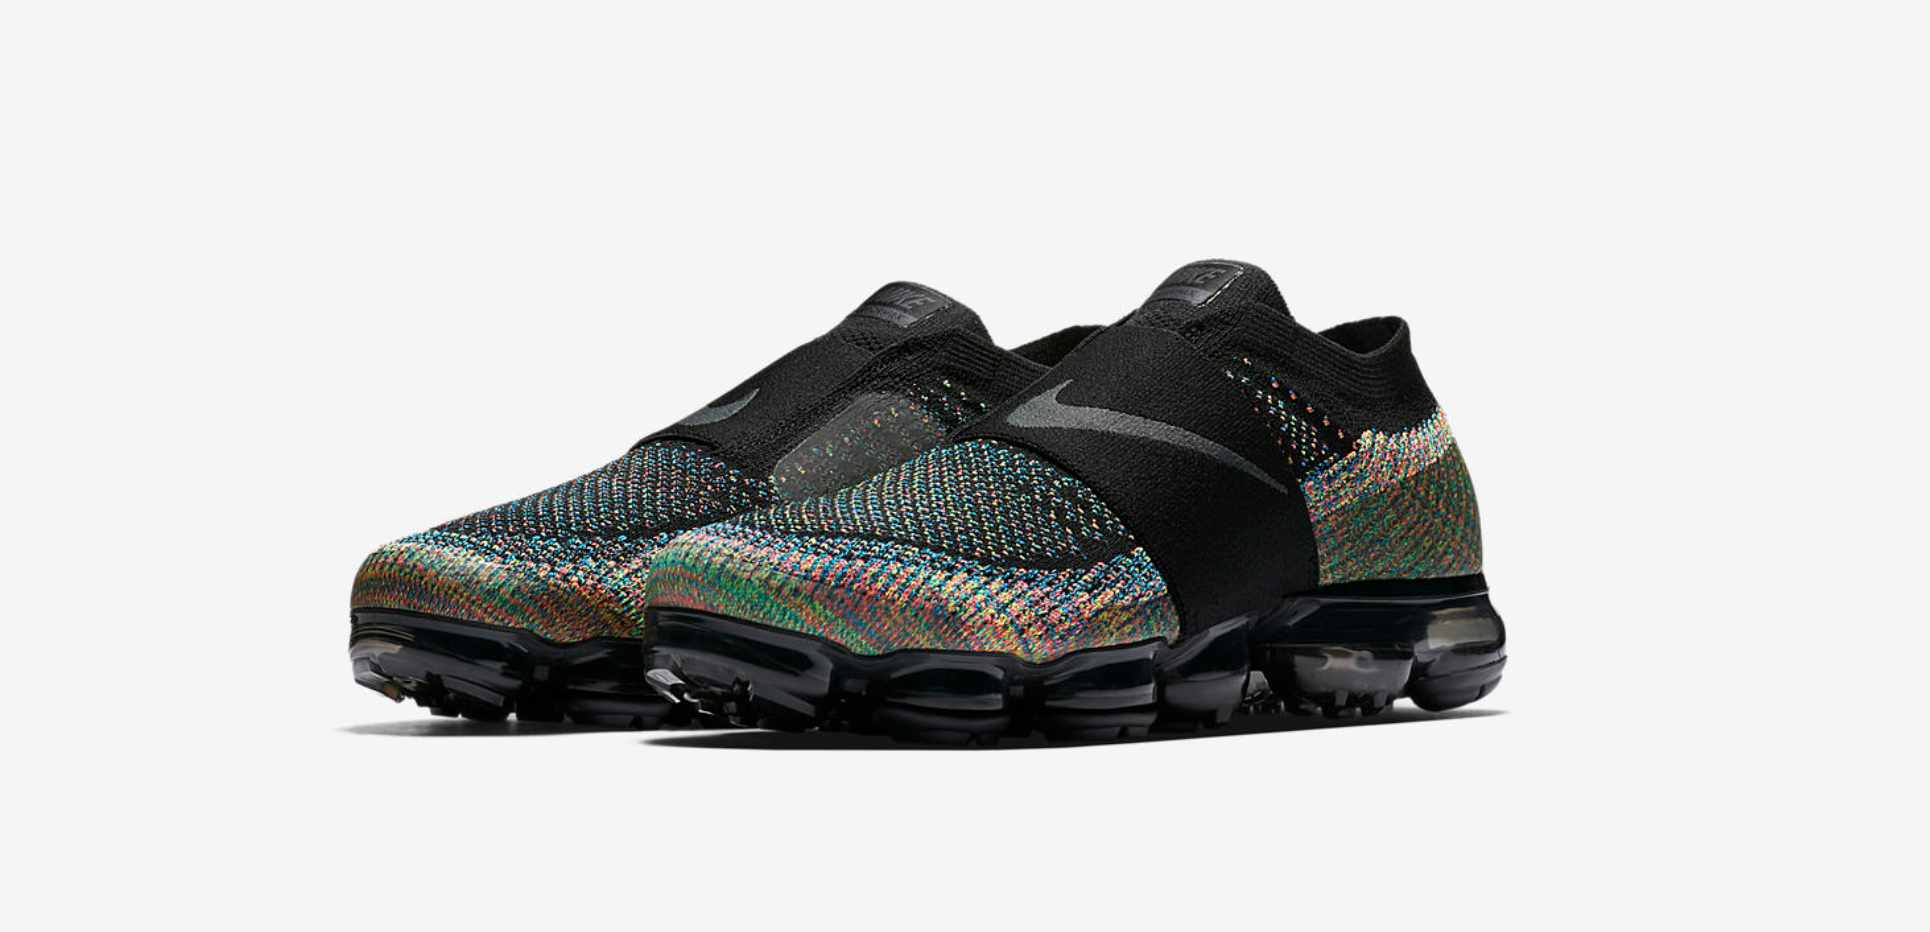 The Nike Air VaporMax Moc Releases on 